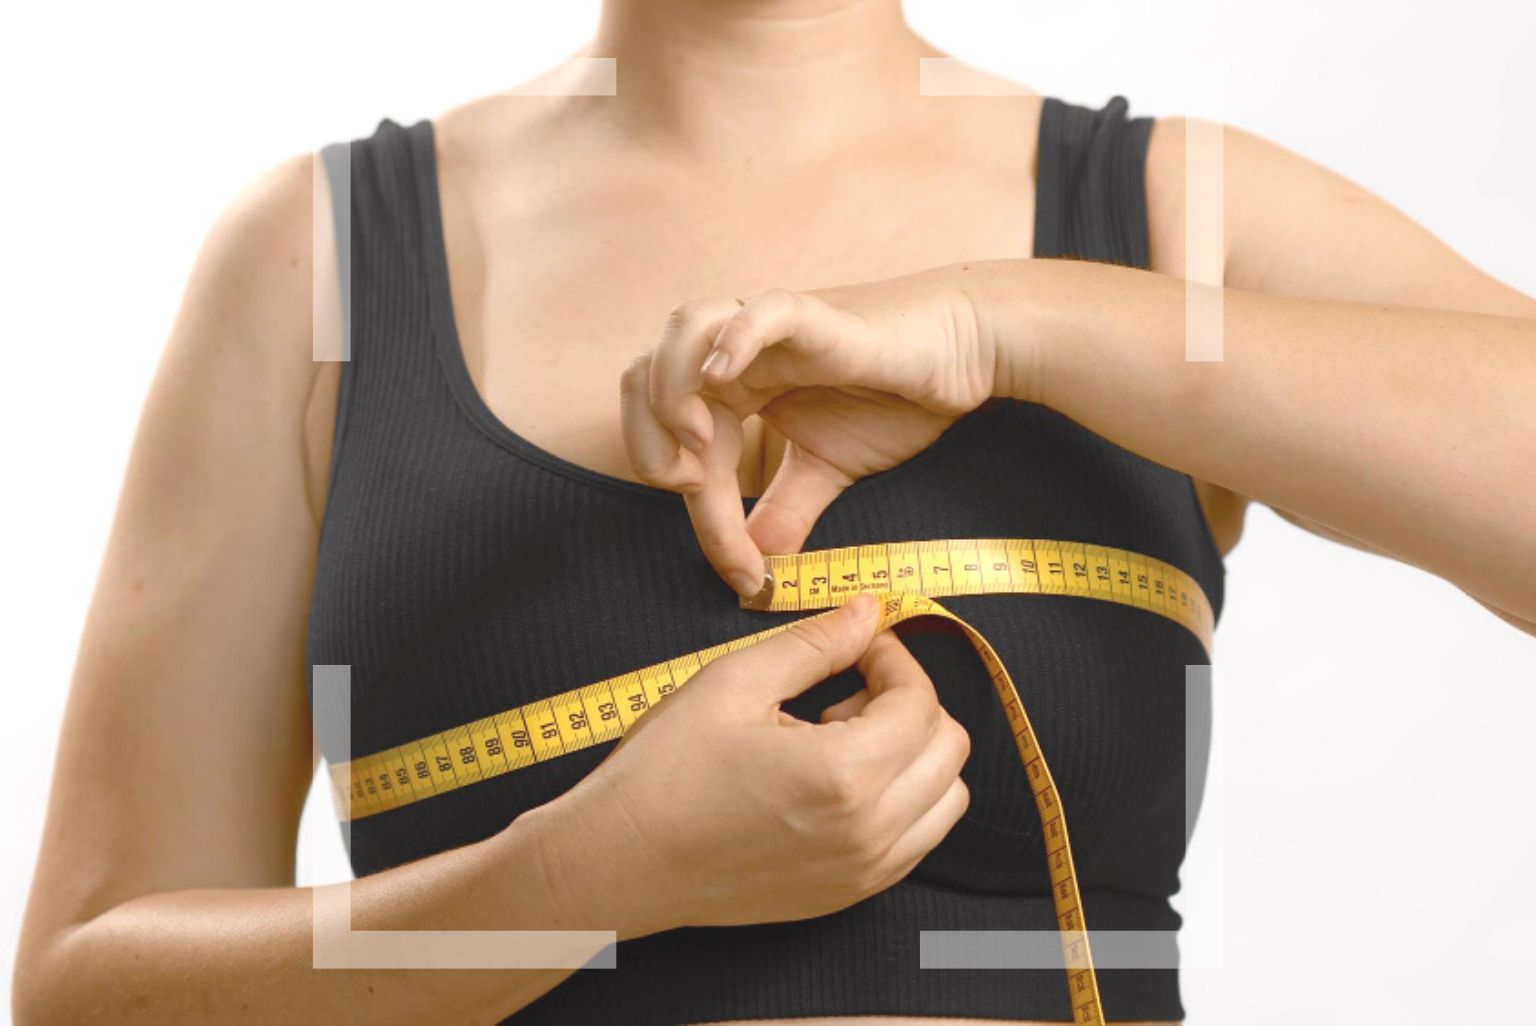 How To Measure Yourself For A Bra Size